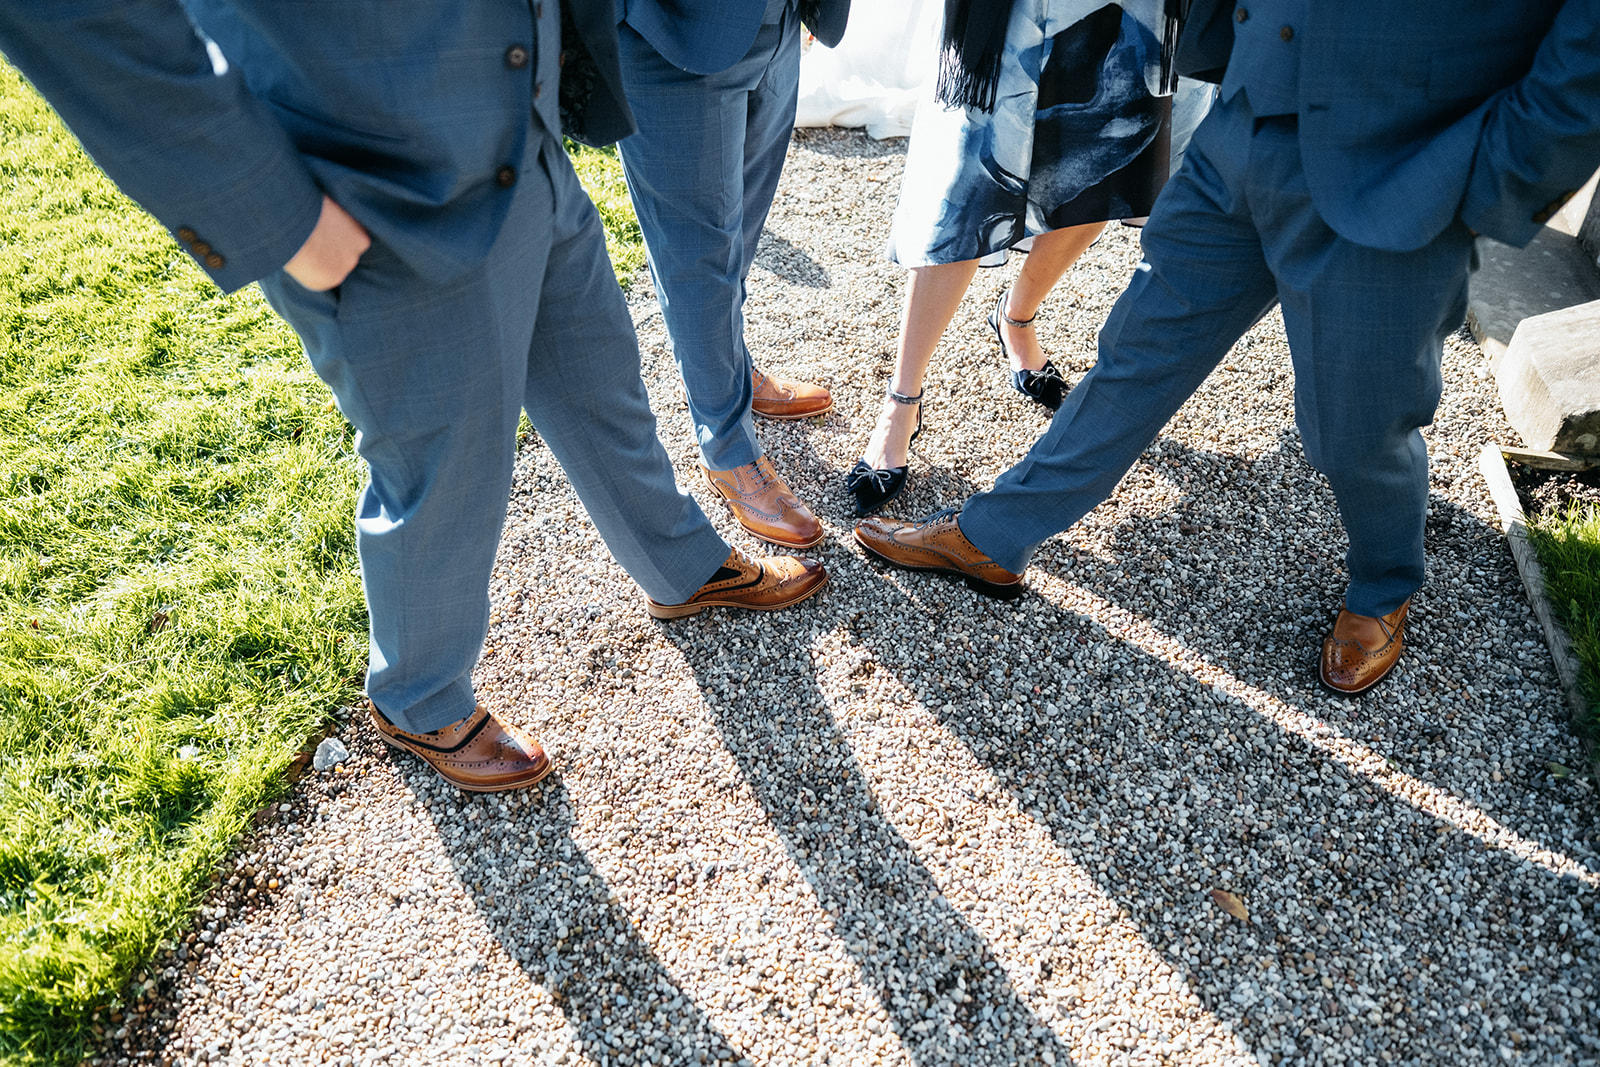 Groomsmen compare shoes after the ceremony.